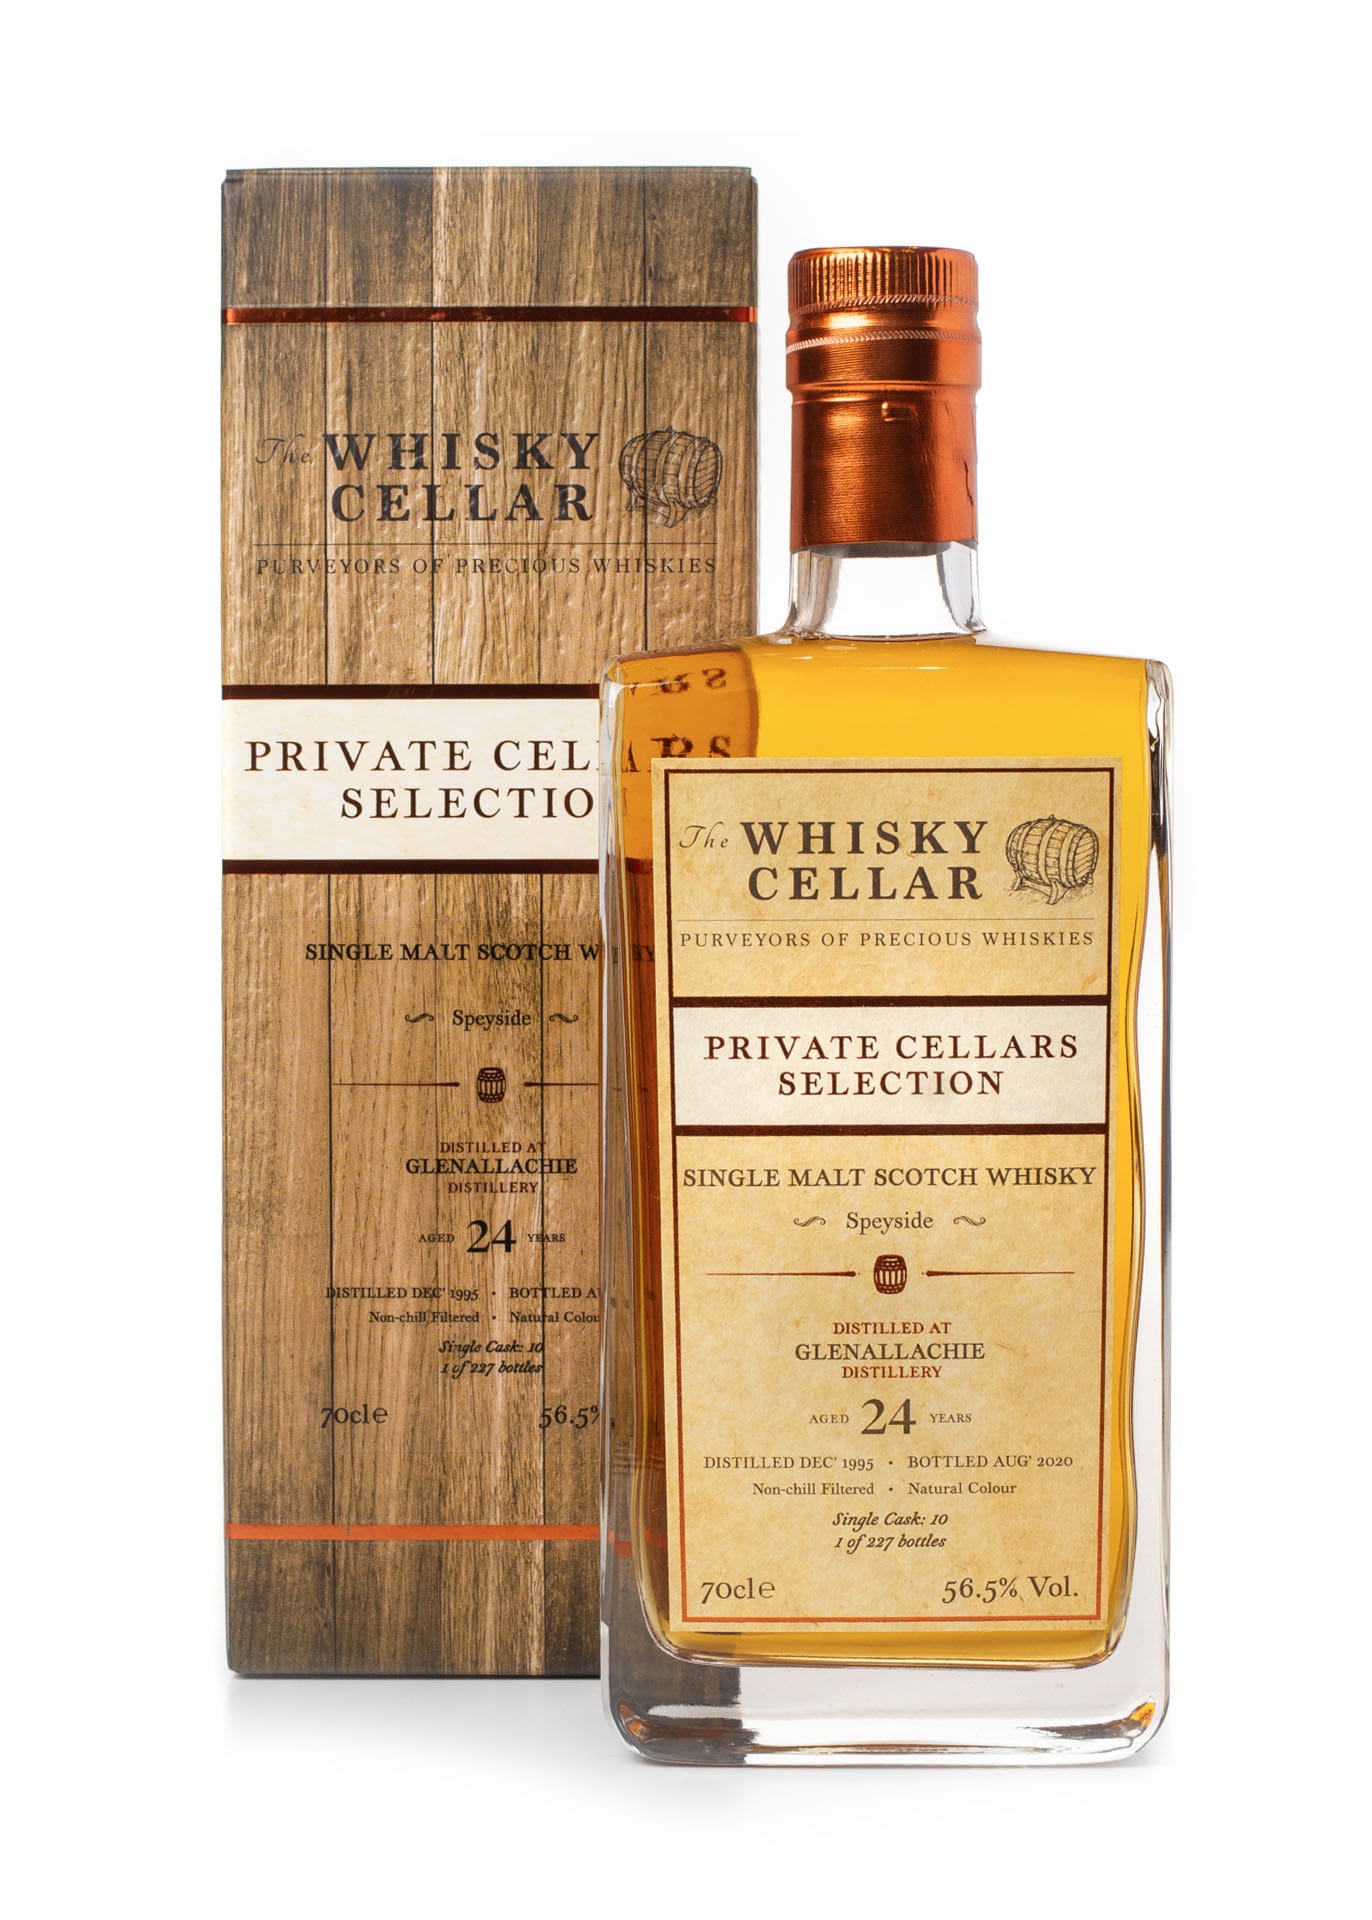  Glenallachie 24 Year Old Single Malt Scotch Whisky from The Whisky Cellar